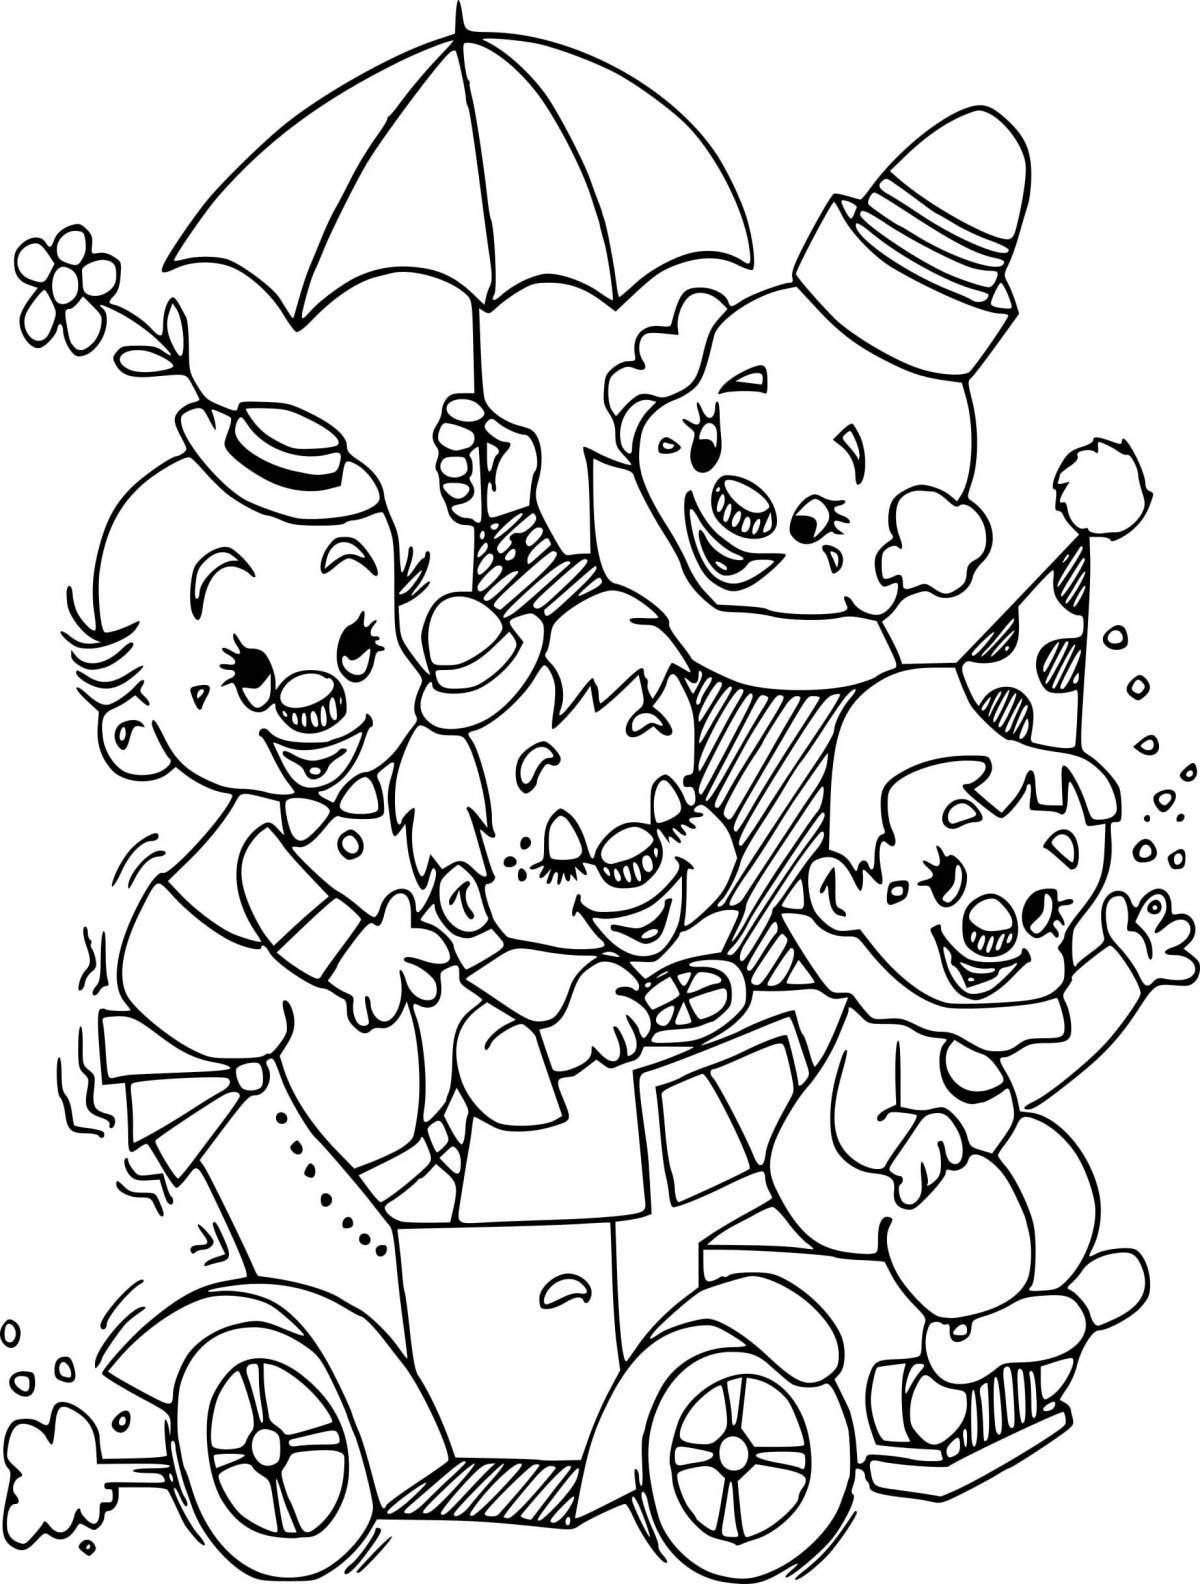 Funny circus coloring for kids